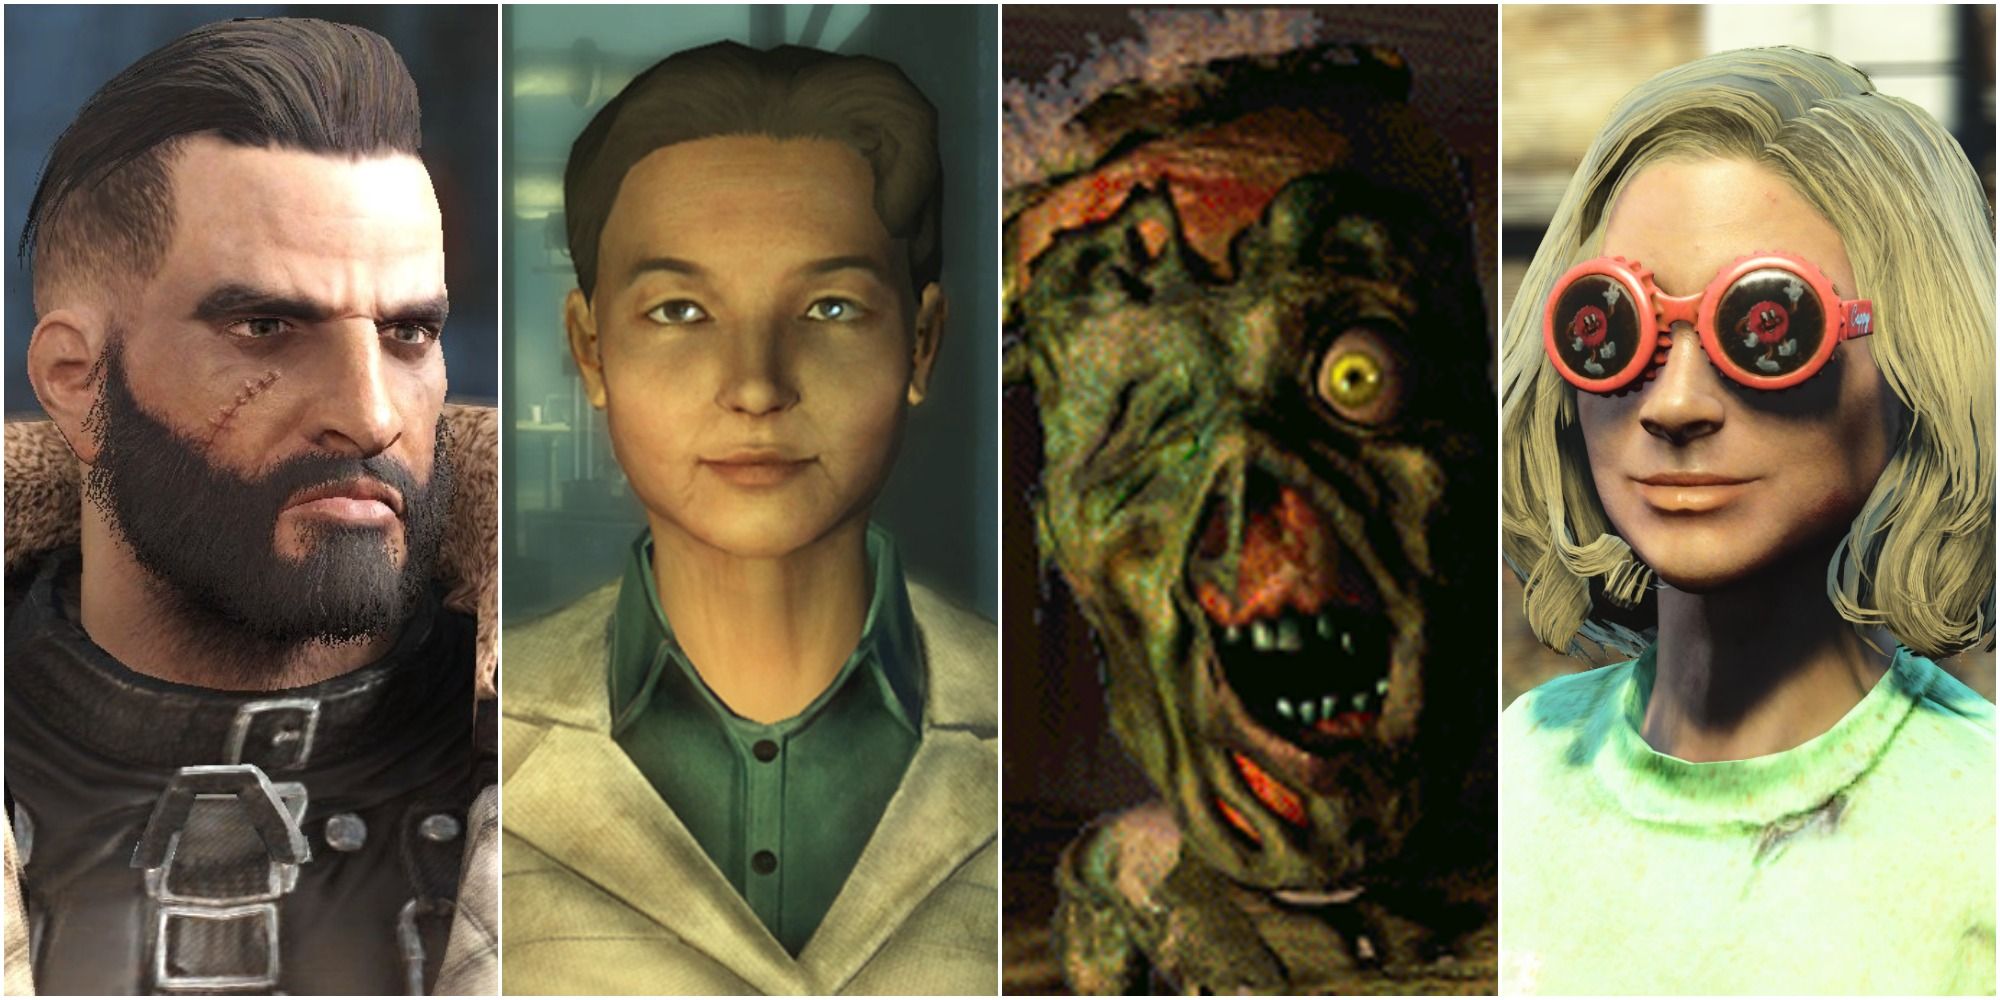 From left to right: Arthur Maxson, Madison Li, Harold and Sierra Petrovita. Each have appeared in more than one Fallout game